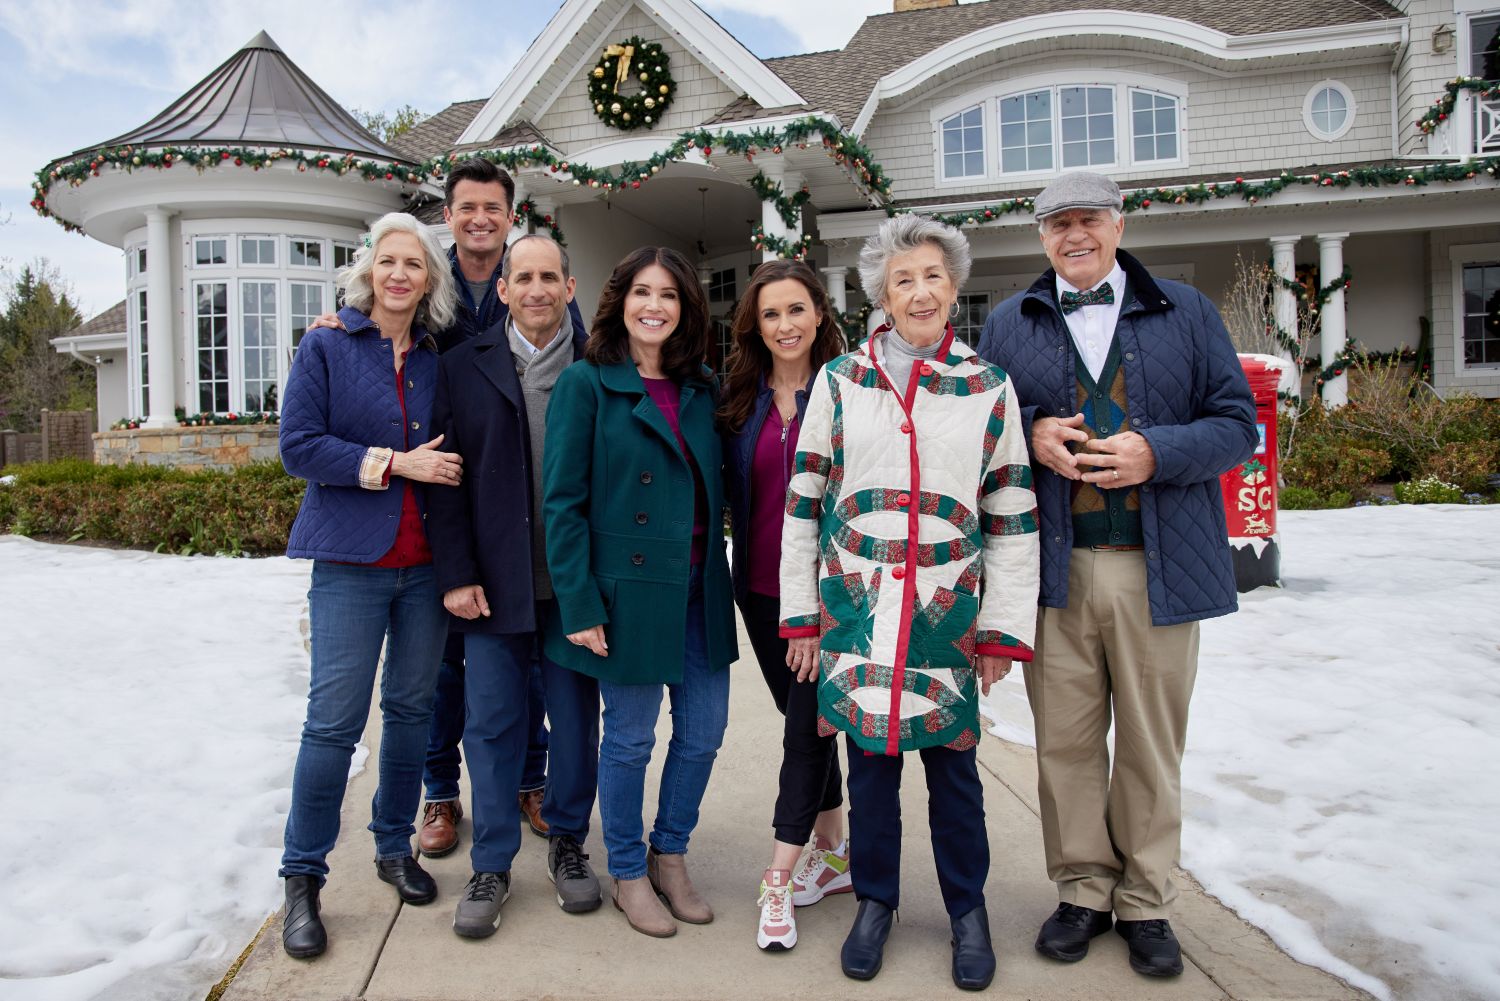 Haul Out the Holly on Hallmark Channel